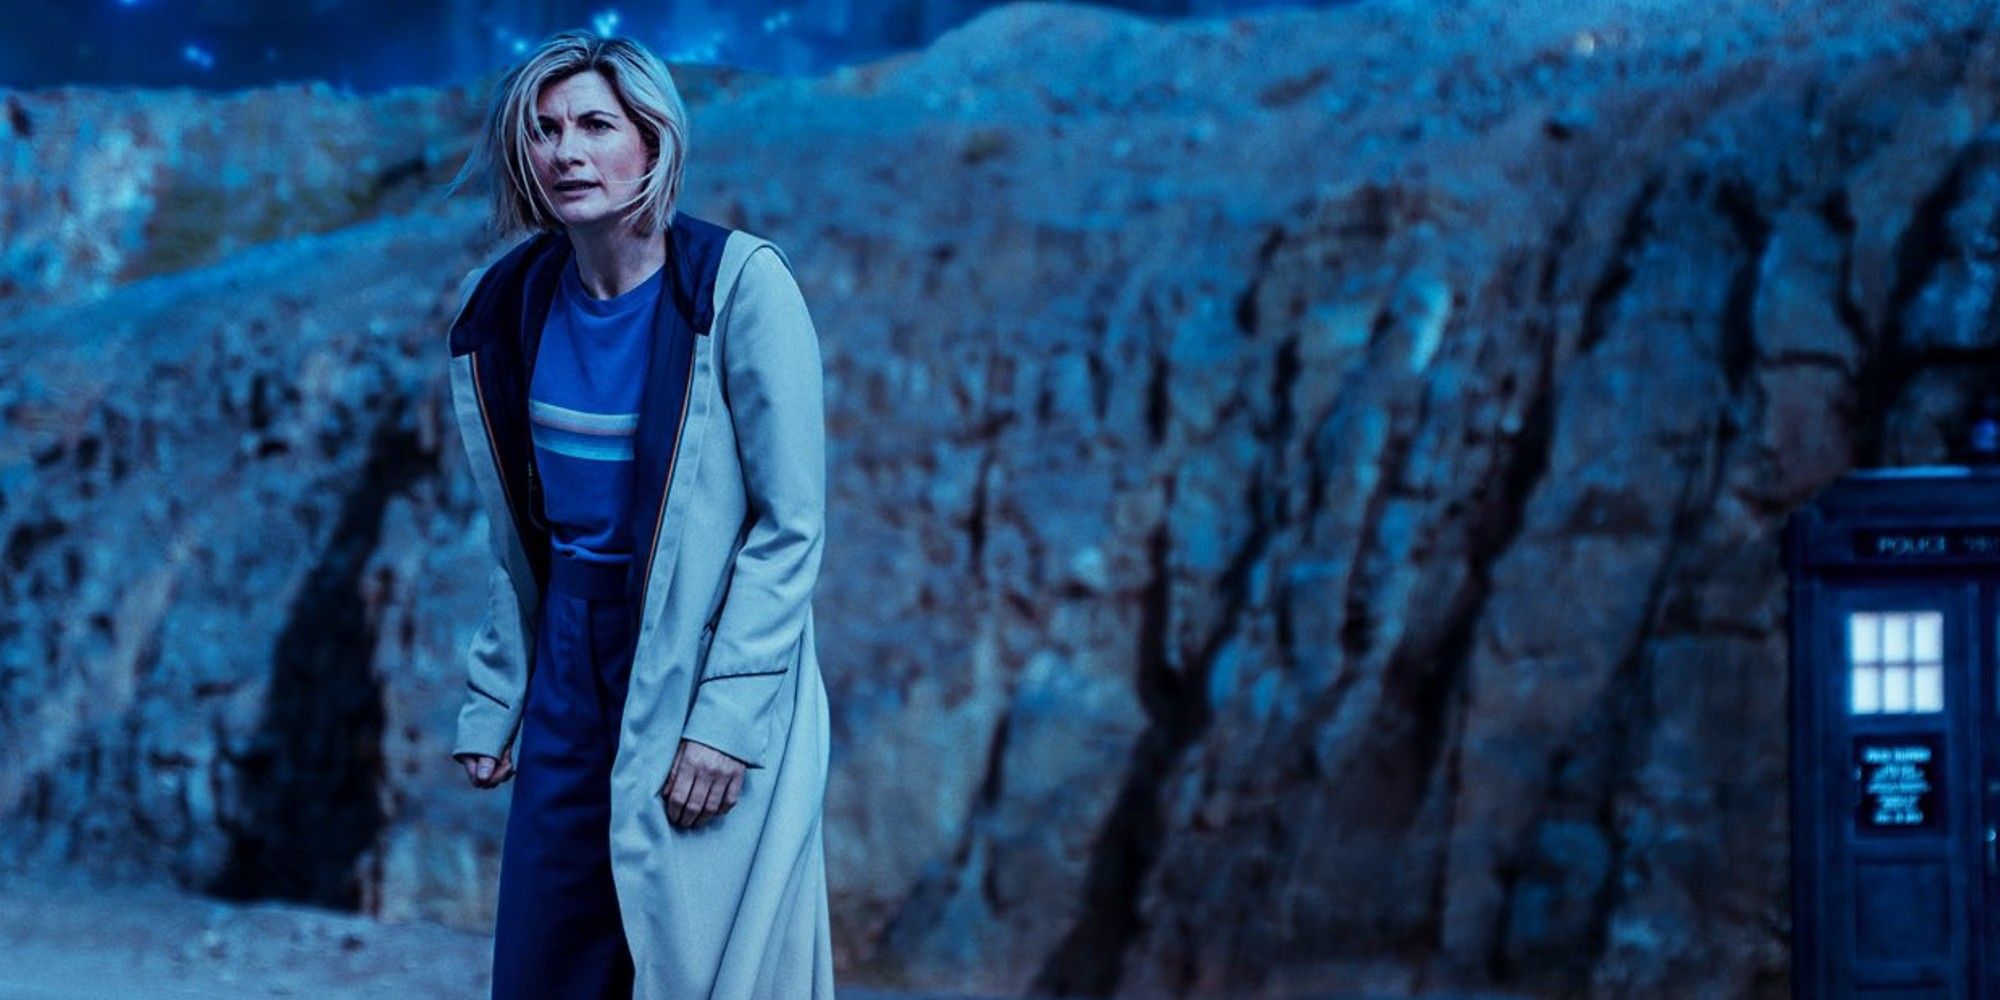 Doctor Who The Power of the Doctor Jodie Whittaker as The Thirteenth Doctor